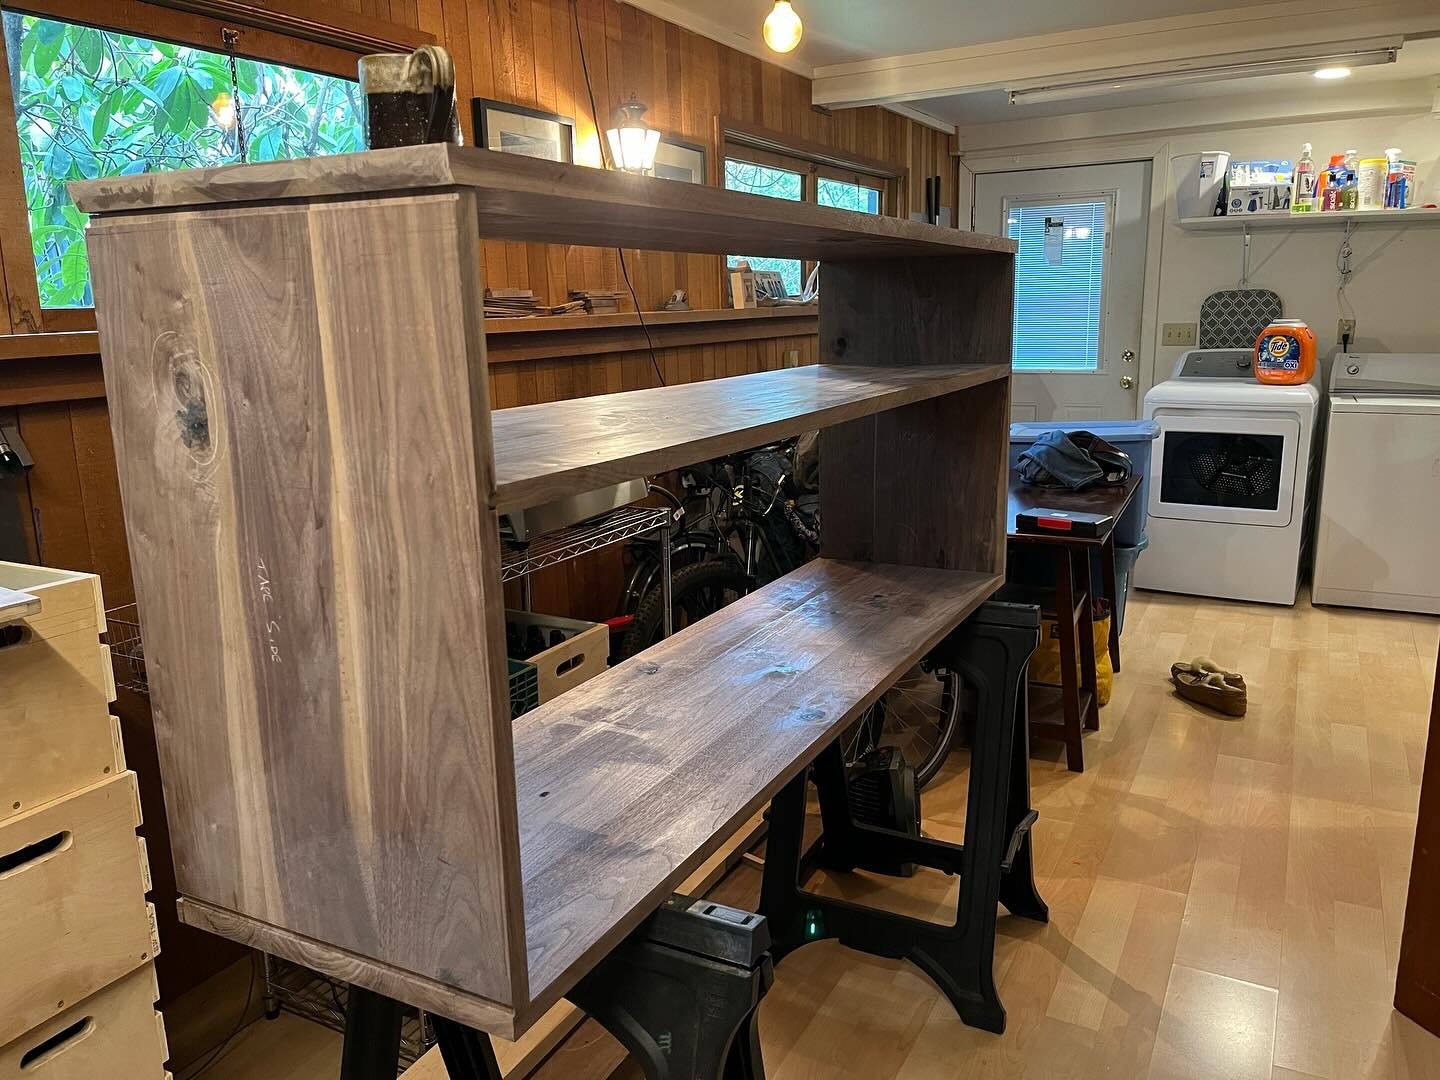 First I gotta build a box before I can start to think outside of one. 📸 @trganz  #woodworker #woodworking #customfurniture #maker #credenza #interiordesign #handmade